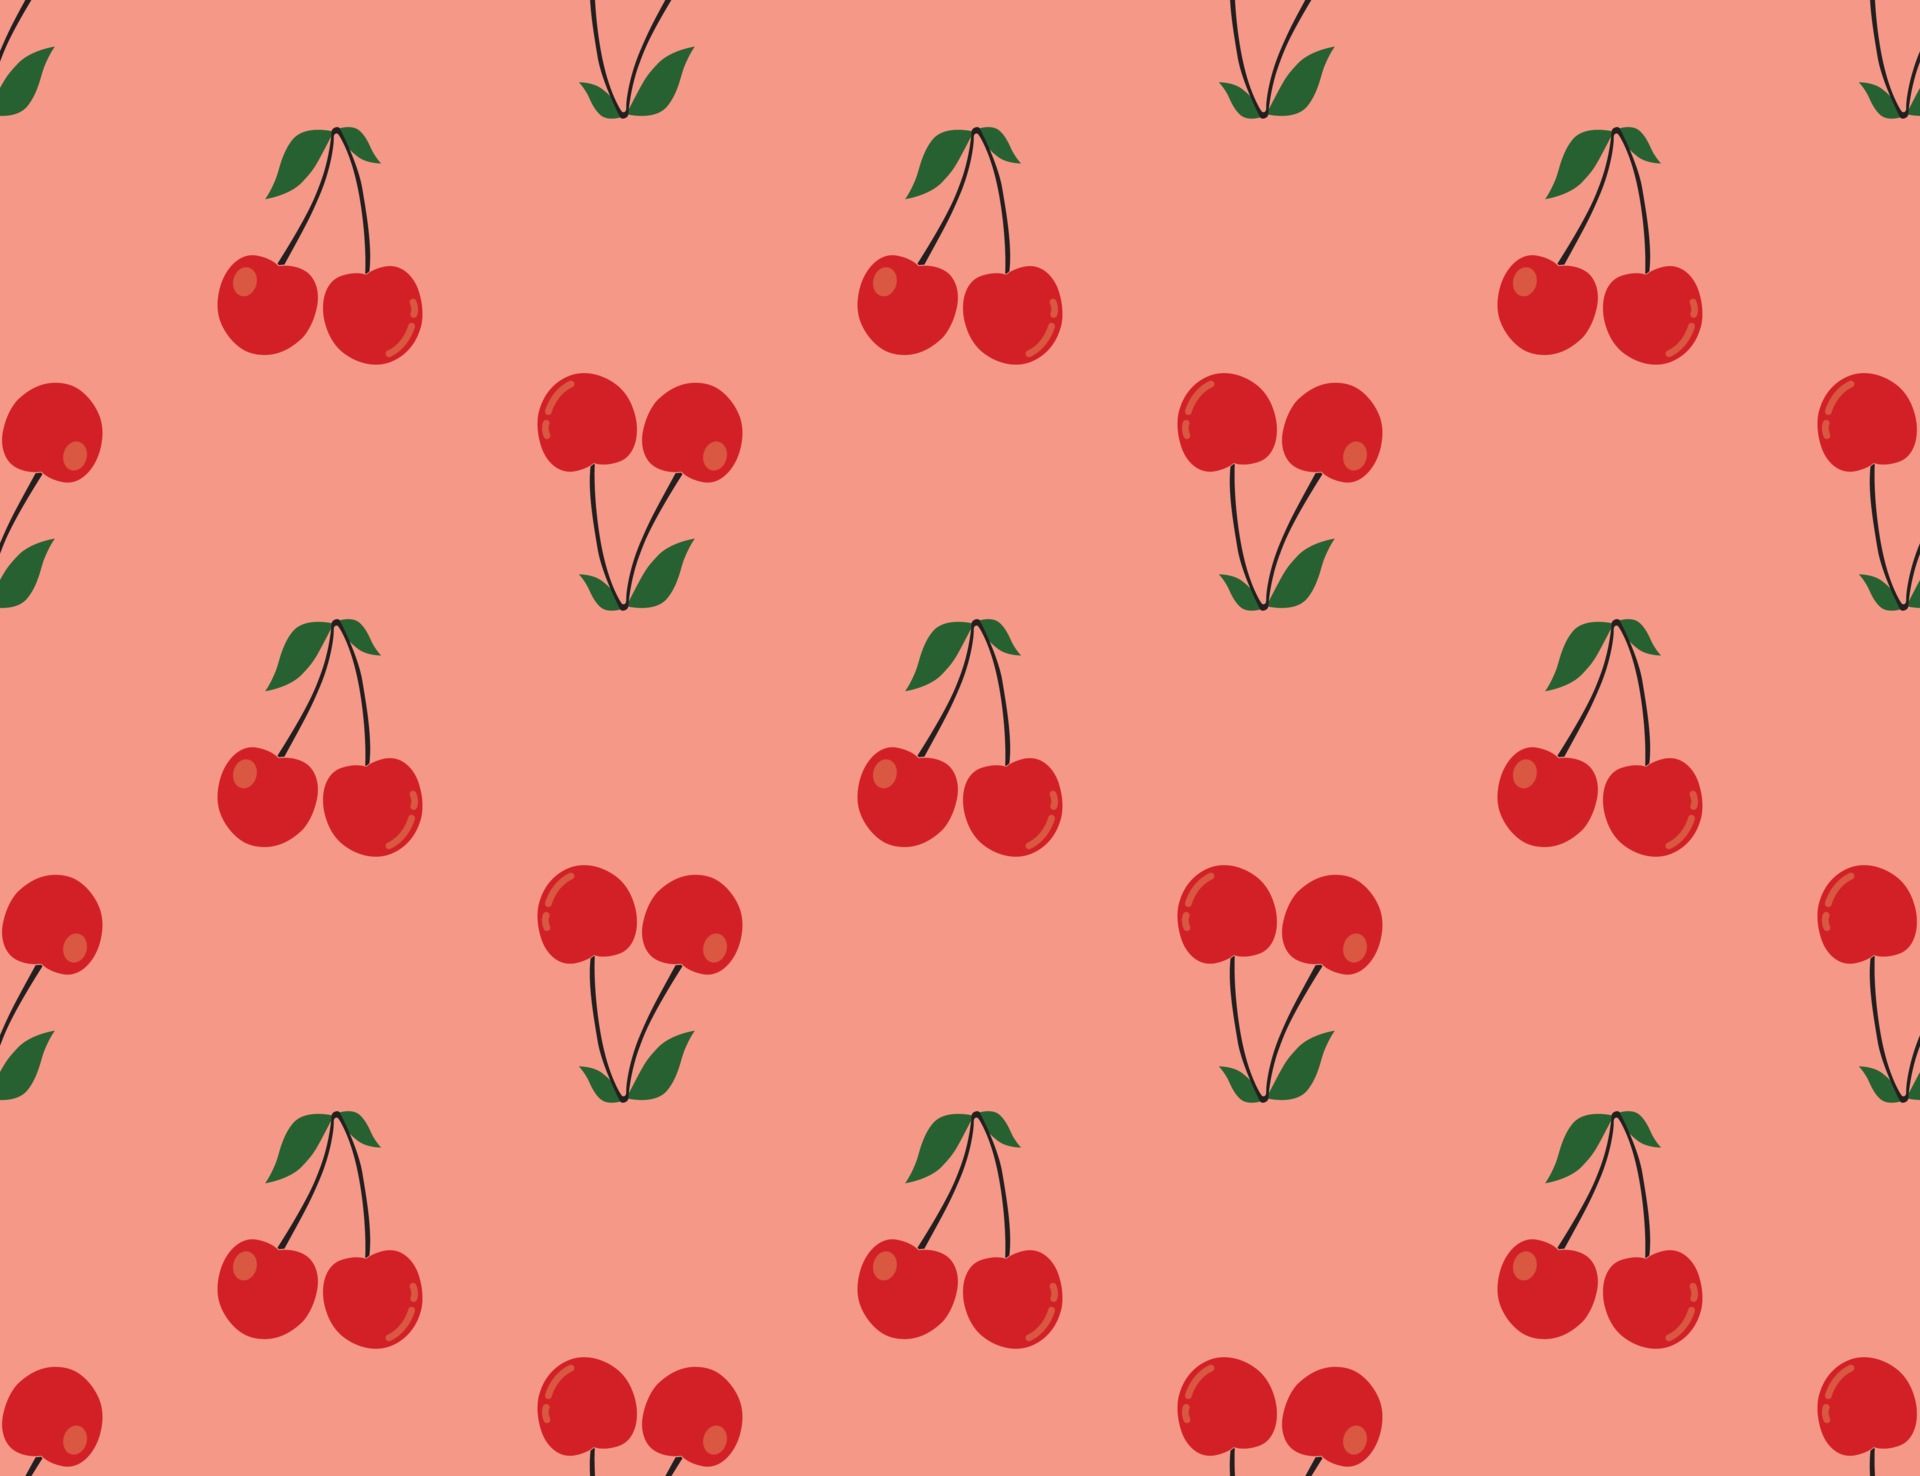 A pattern of red cherries with green stems and leaves on a salmon background. - Light red